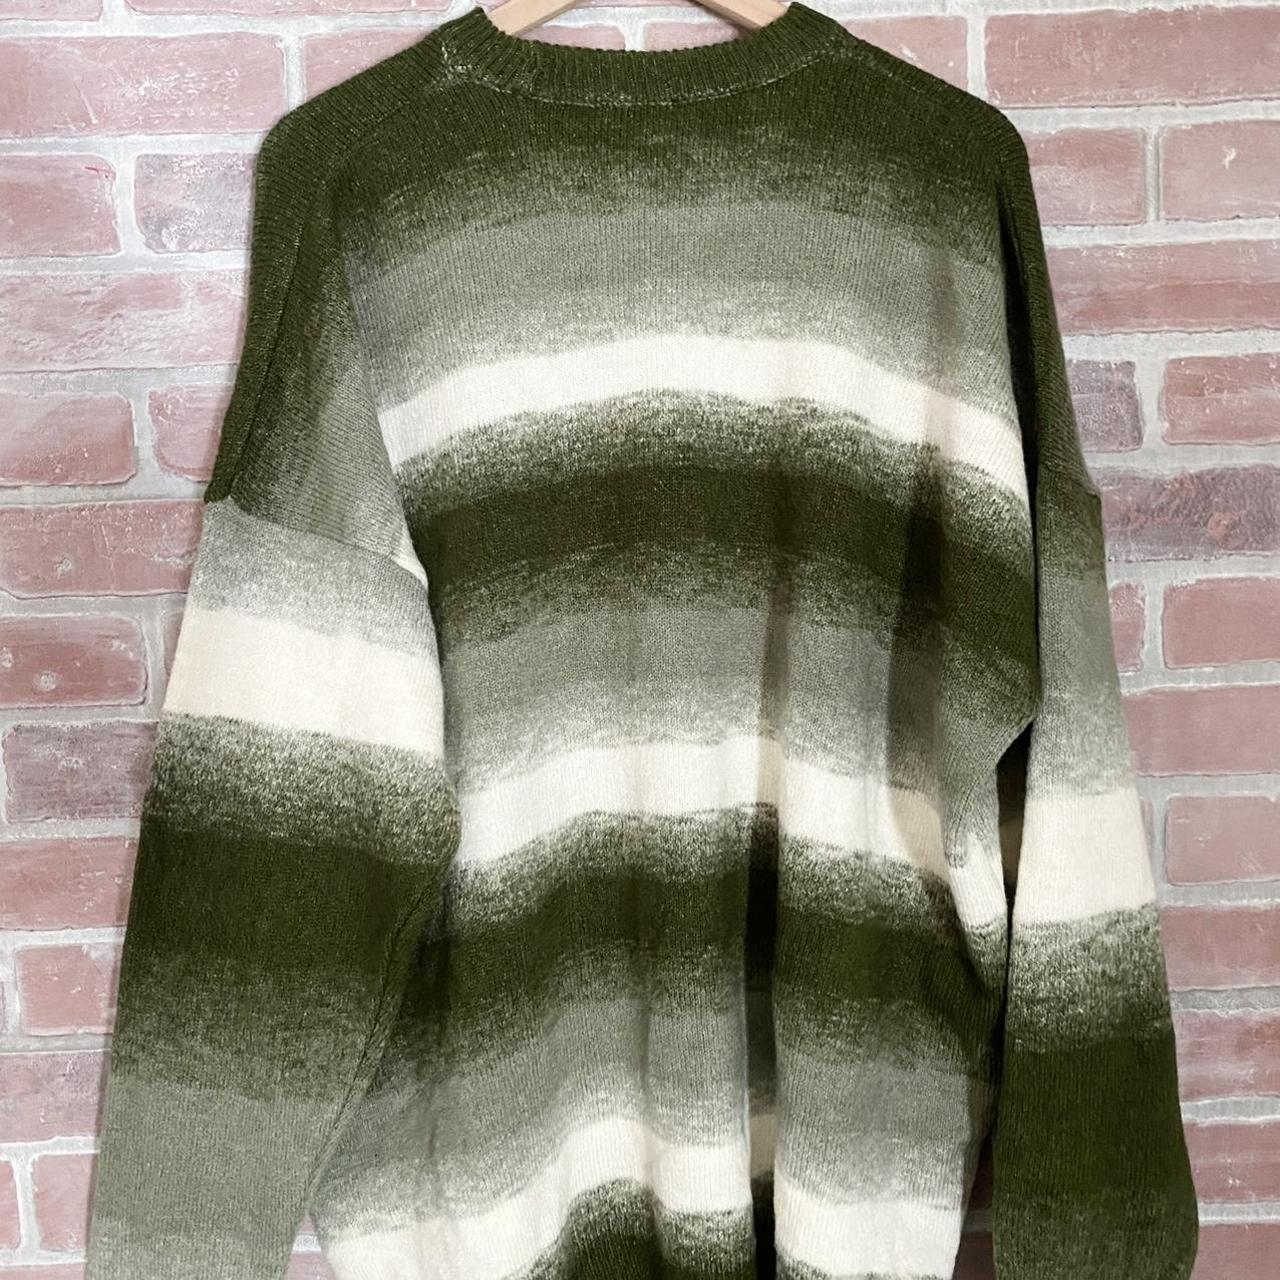 Boohoo Men's Green and White Jumper (2)